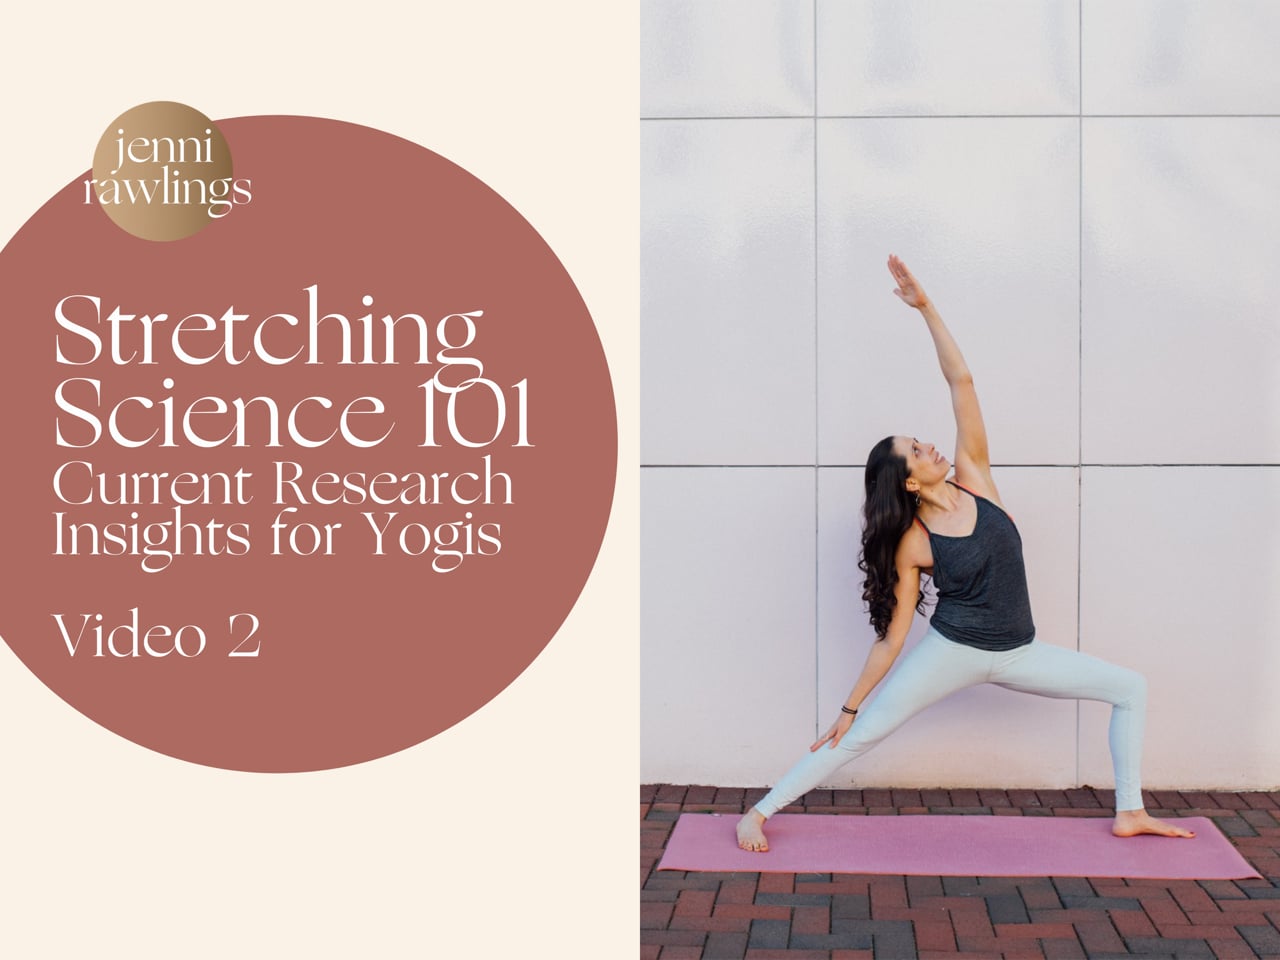 Video 2 – Stretching Science 101